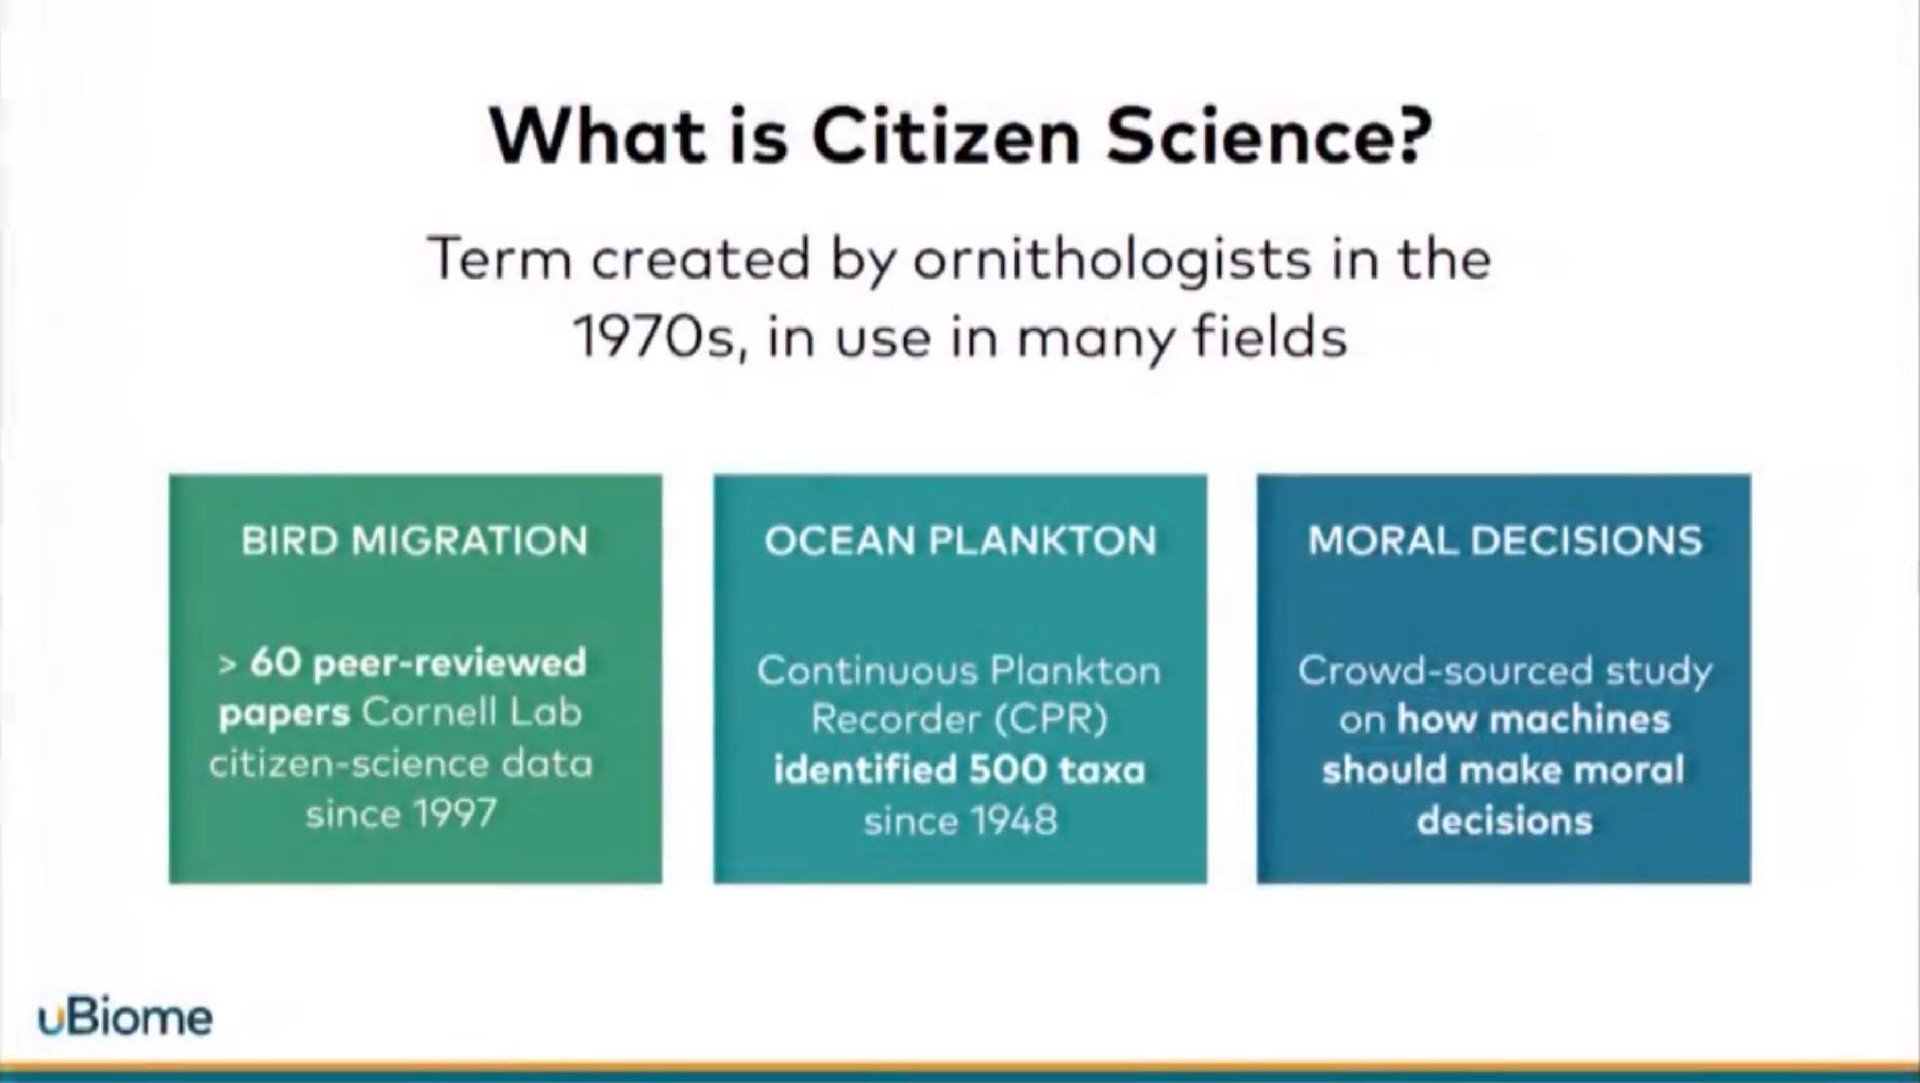 what is citizen science term created by ornithologists in the | uBiome